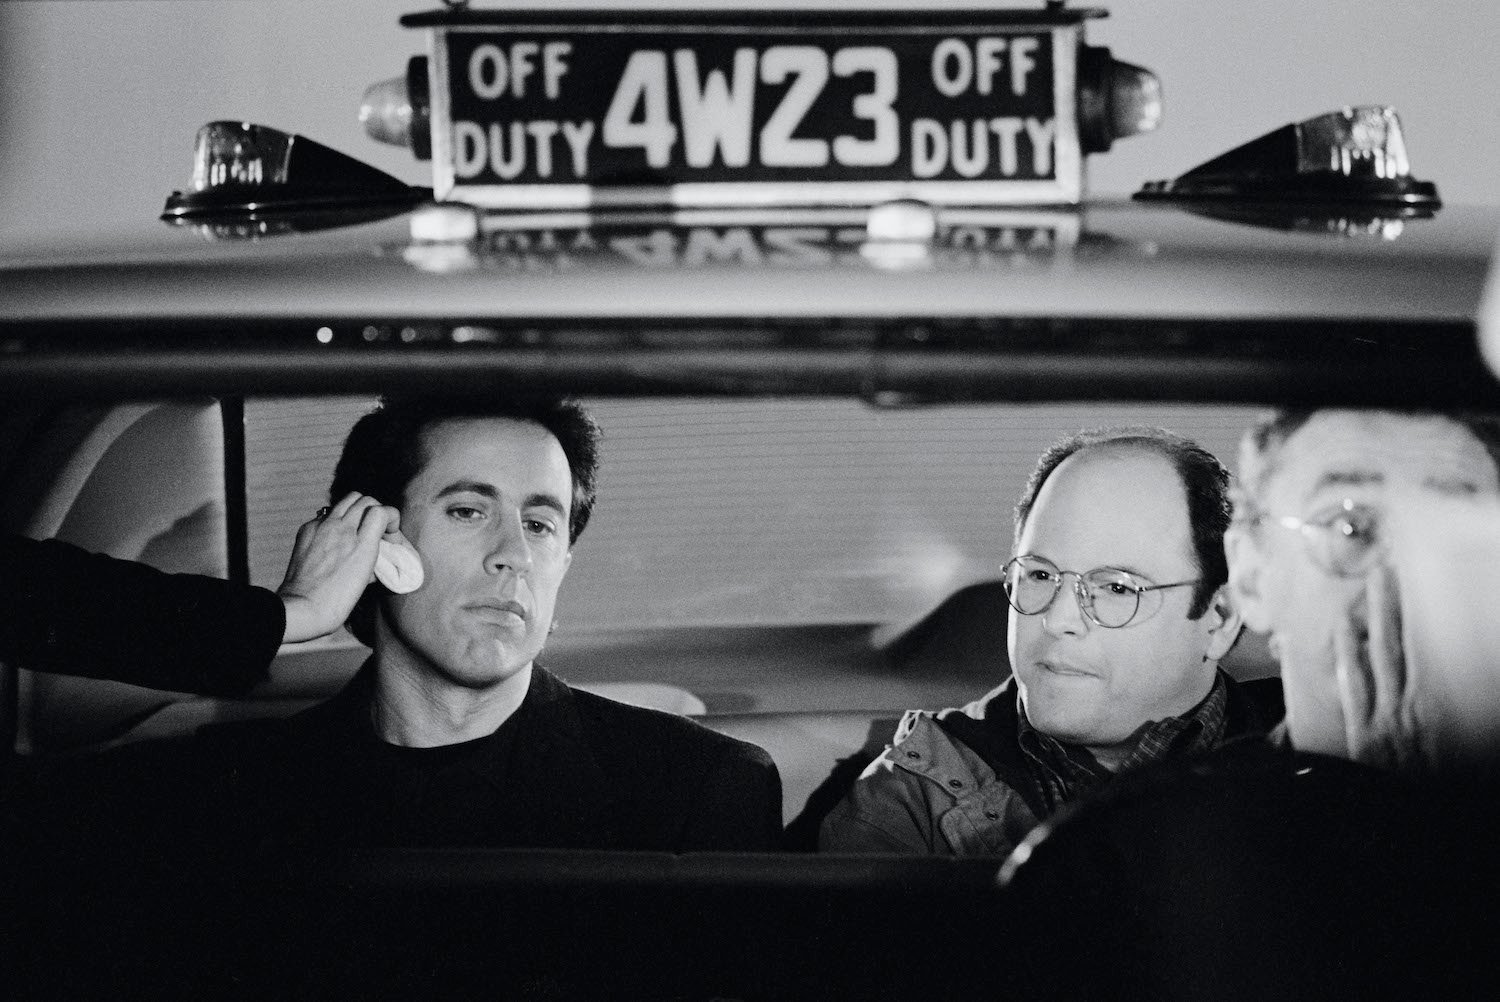 Jerry Seinfeld and Jason Alexander filming the last episodes of 'Seinfeld'